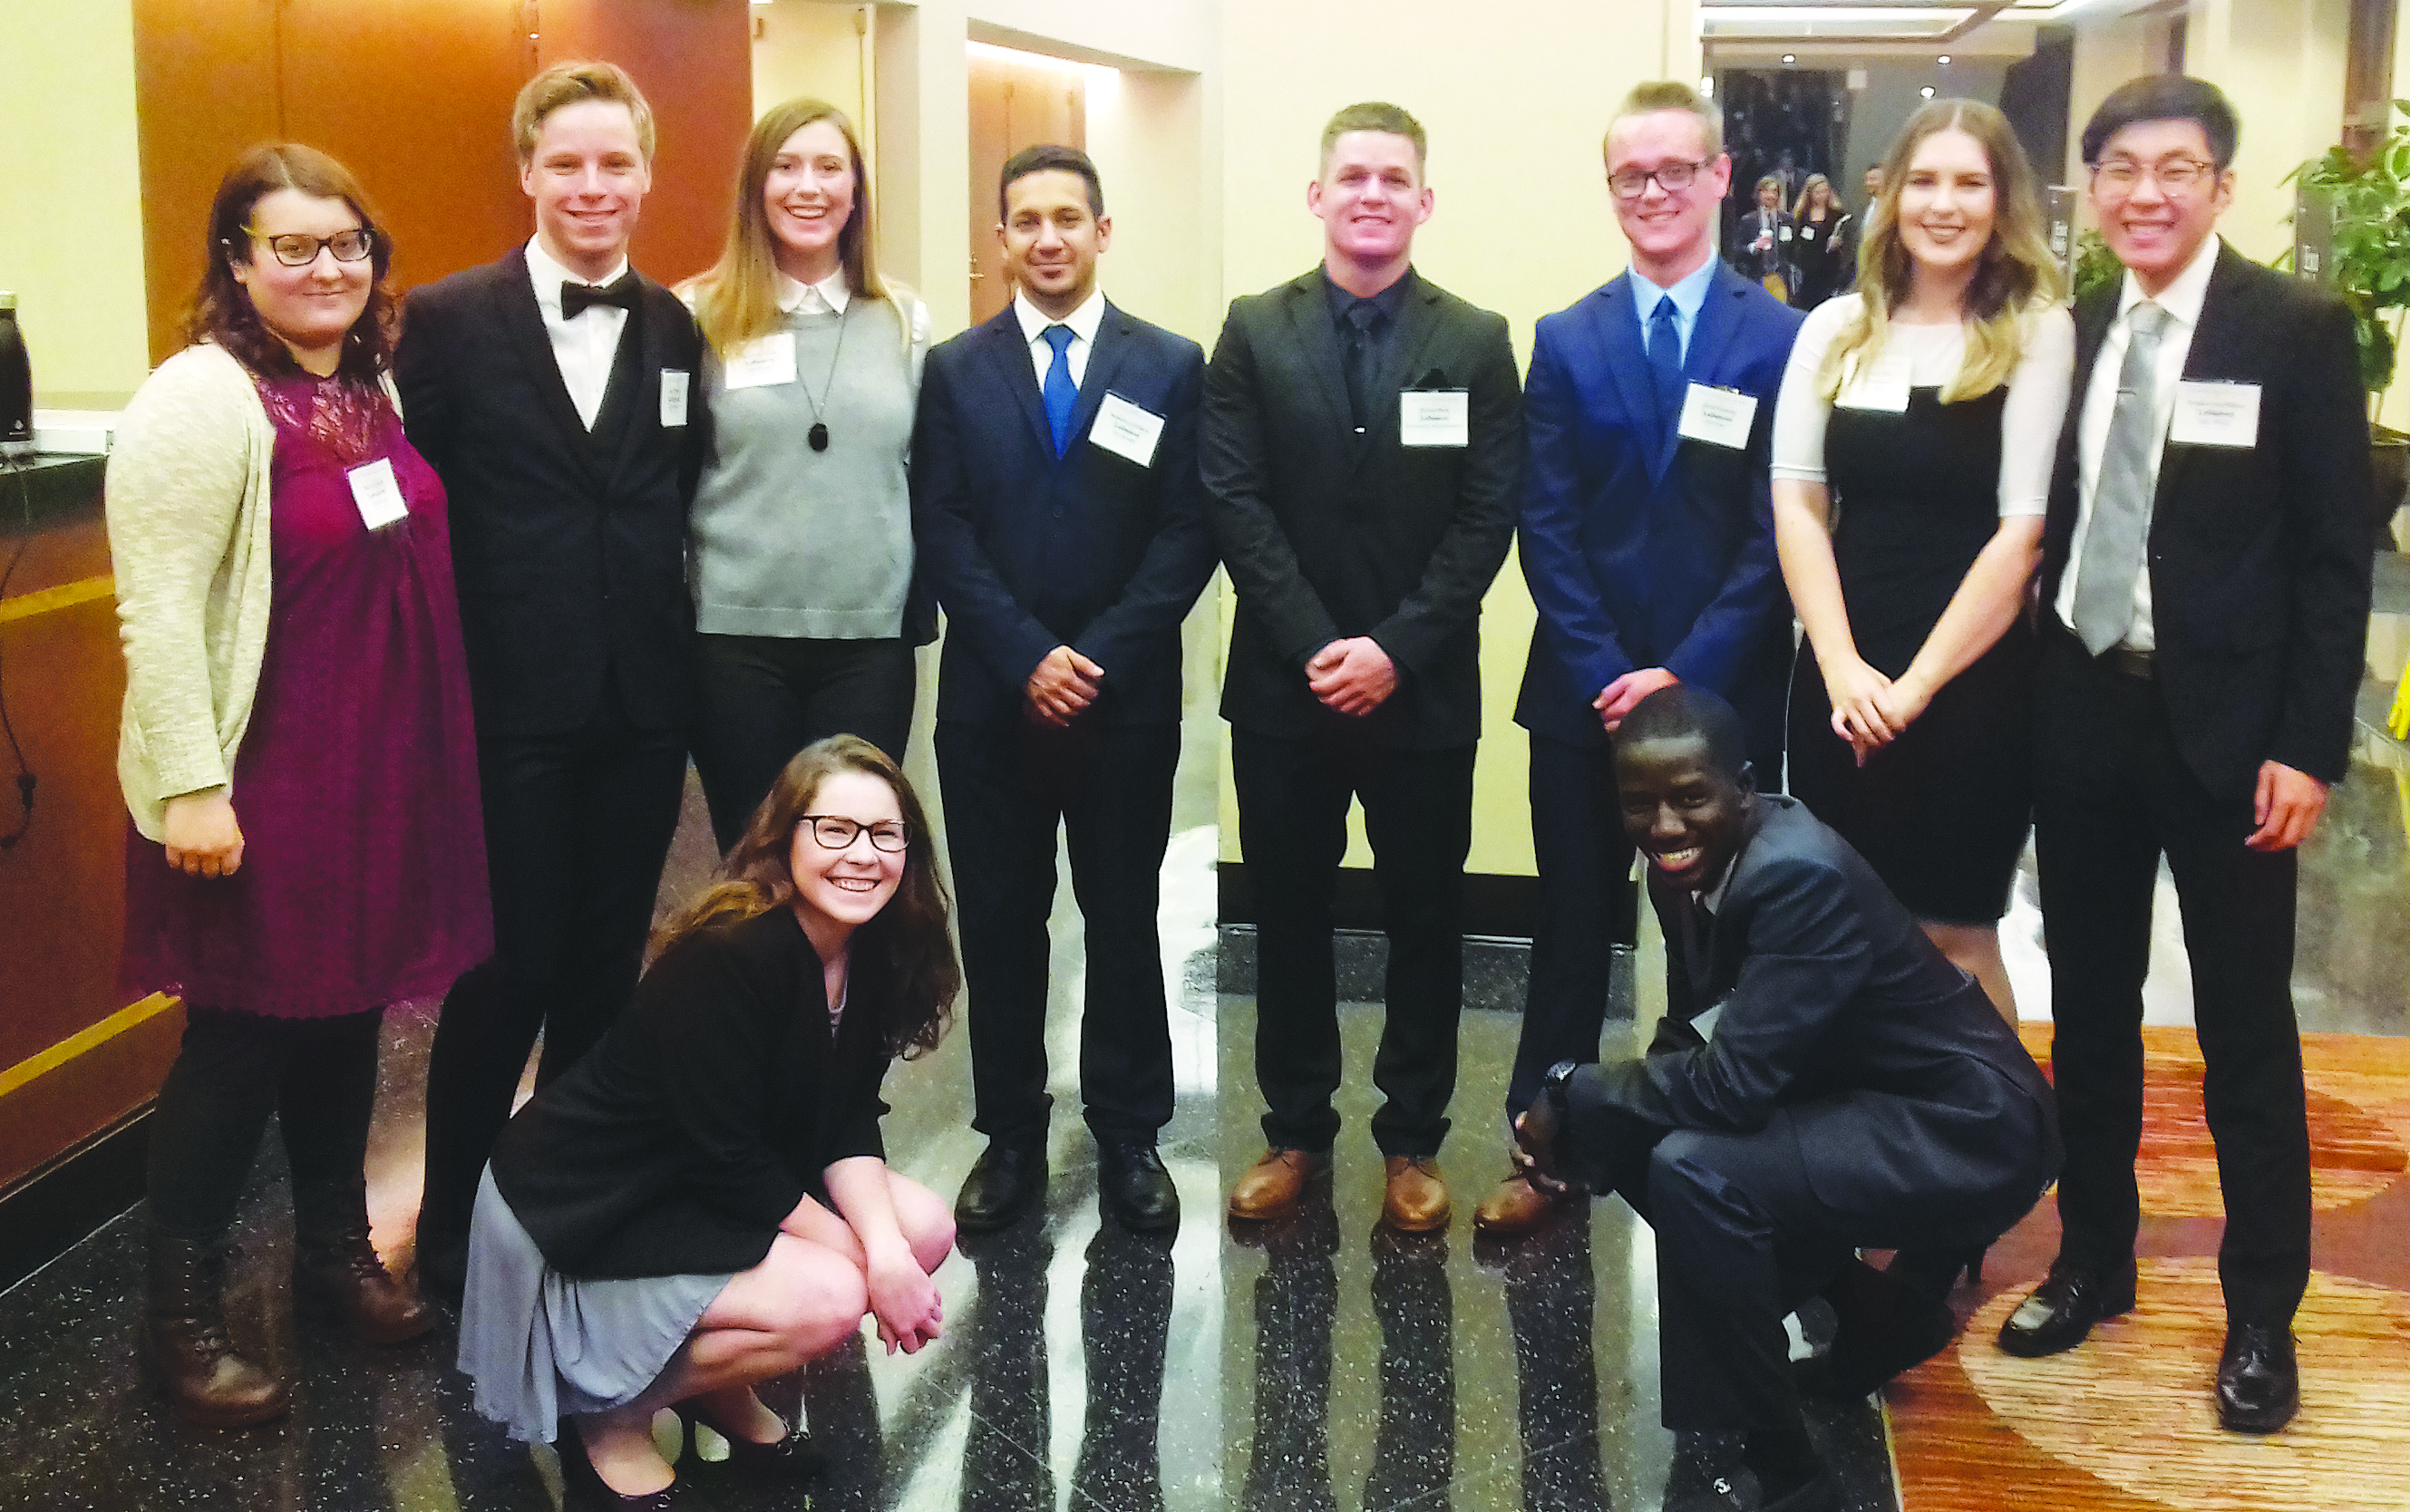 photos of students at Model UN Event in Chicago